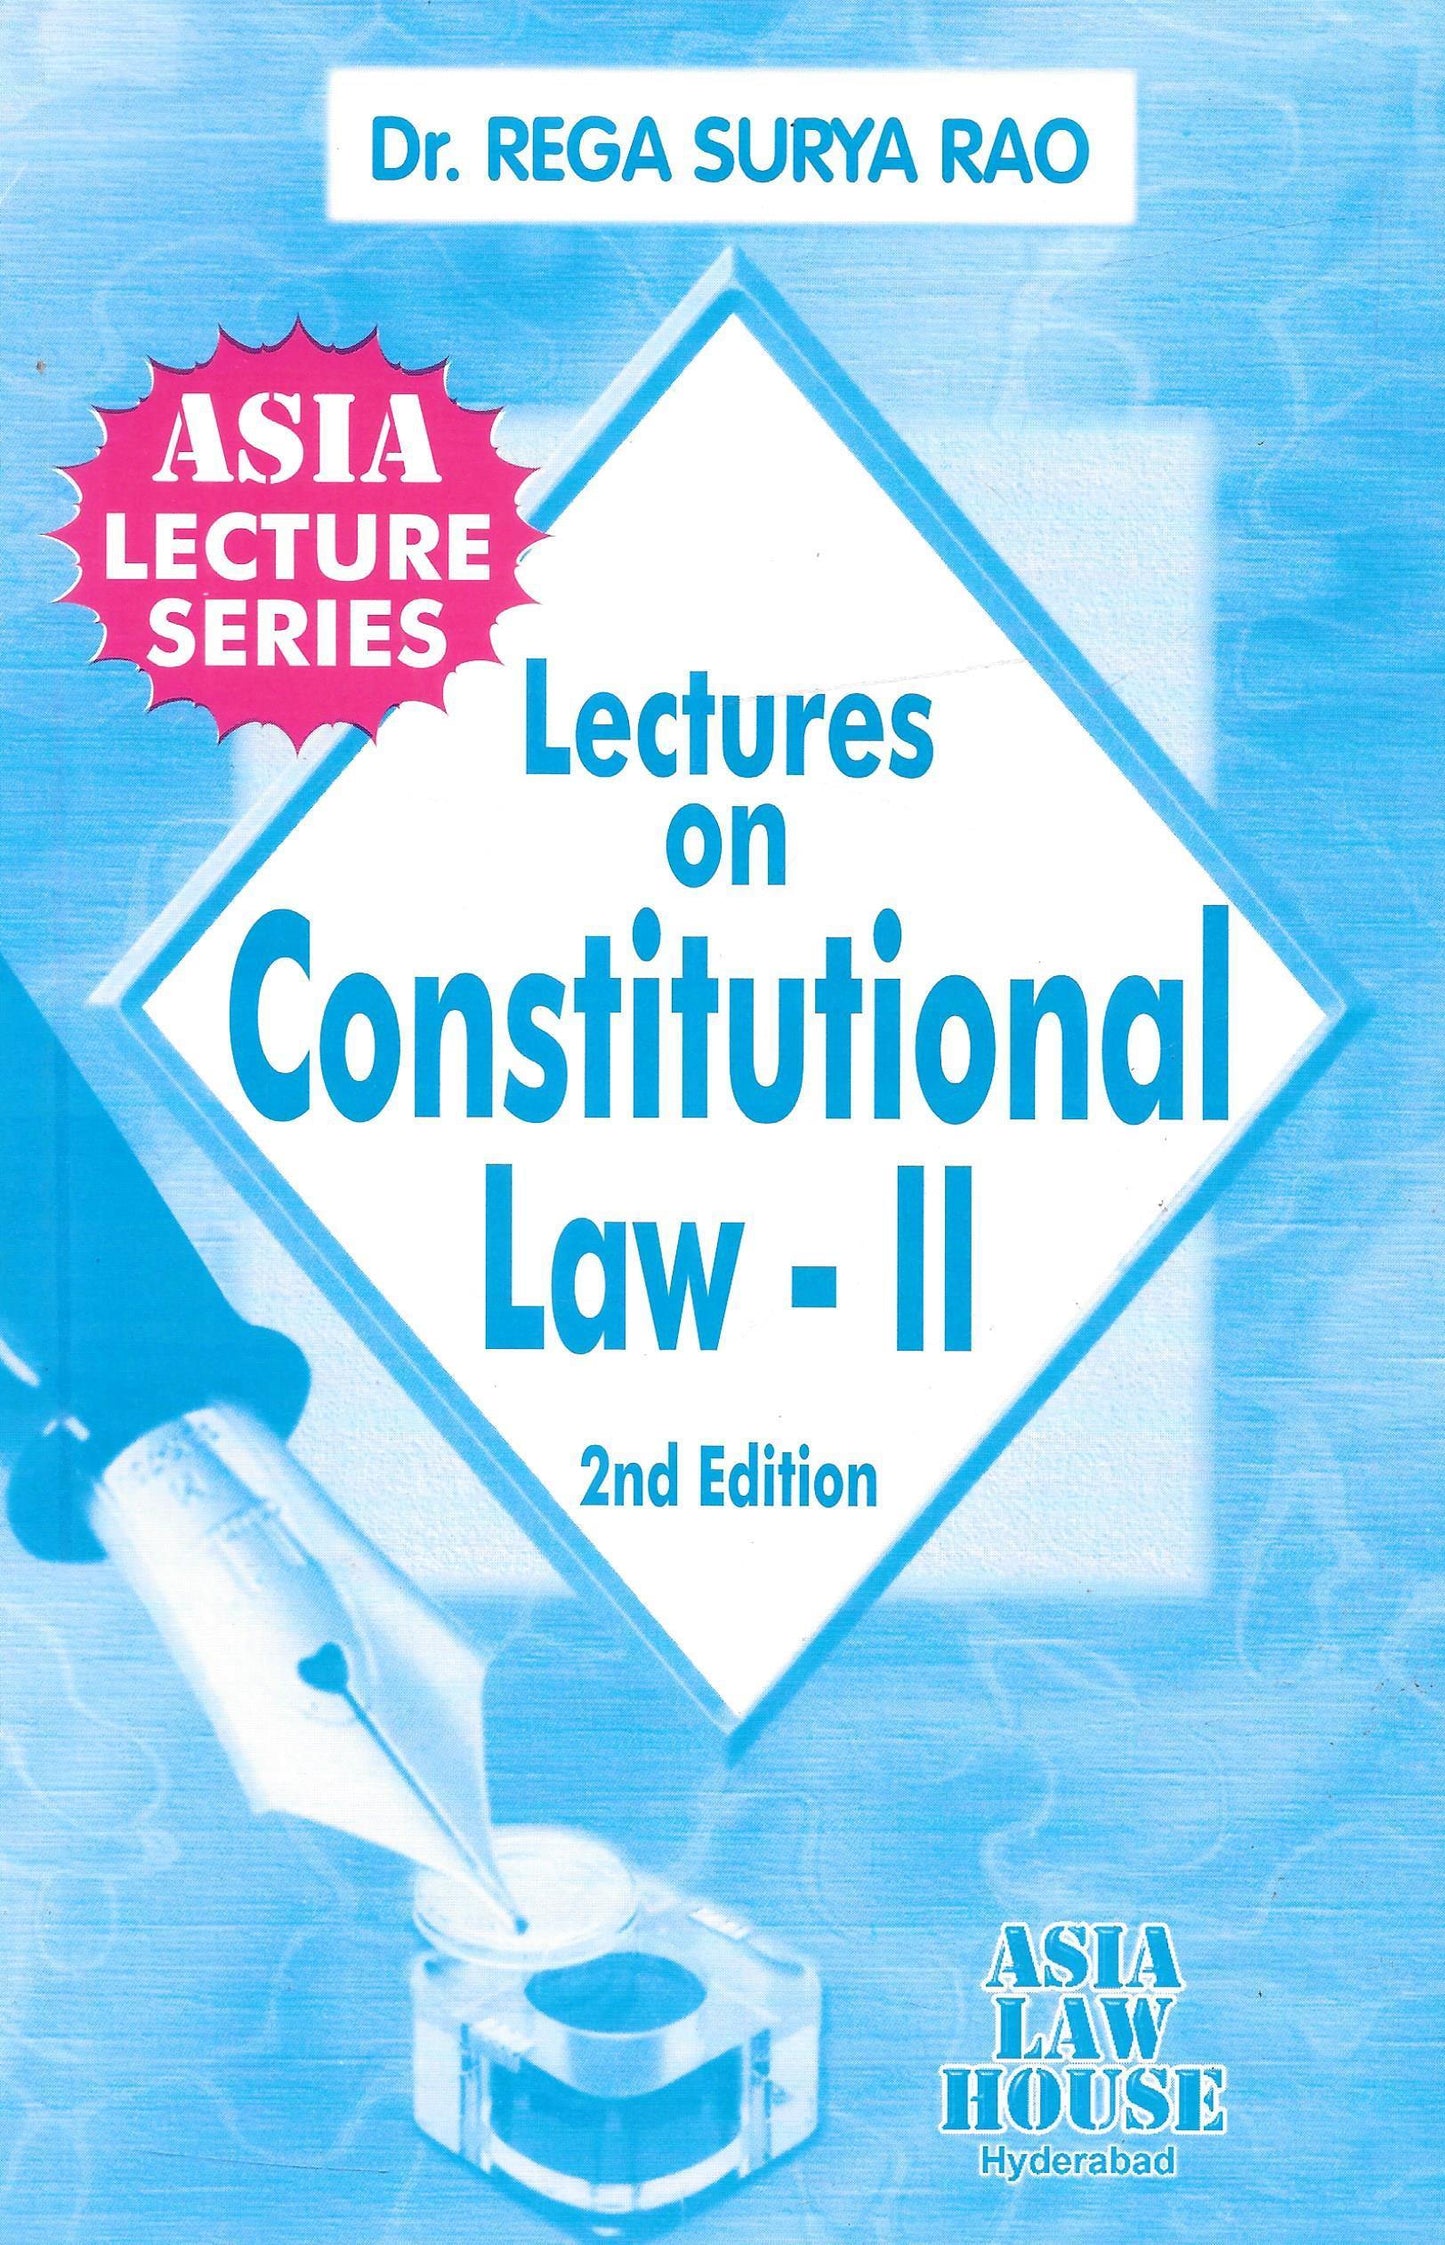 Lectures on Constitutional Law - II